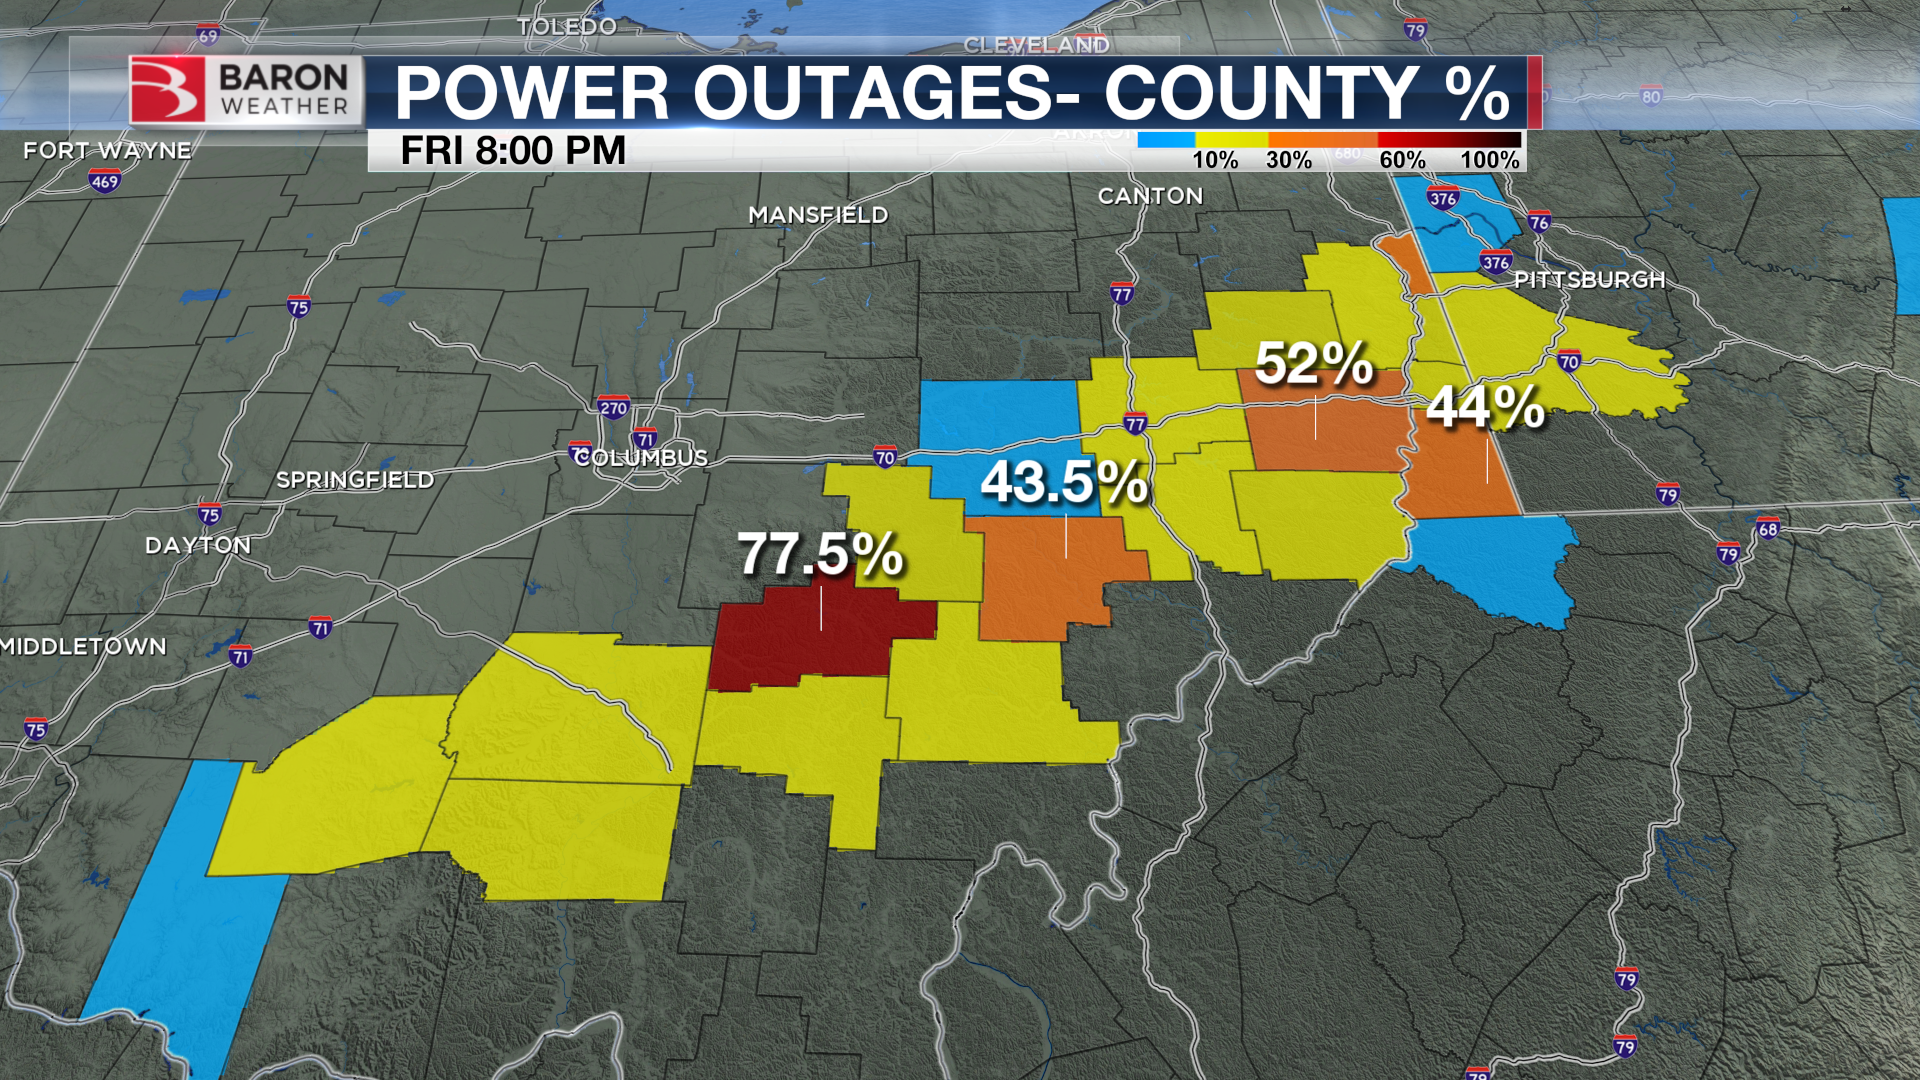 Power-Out-County-Percent-Close